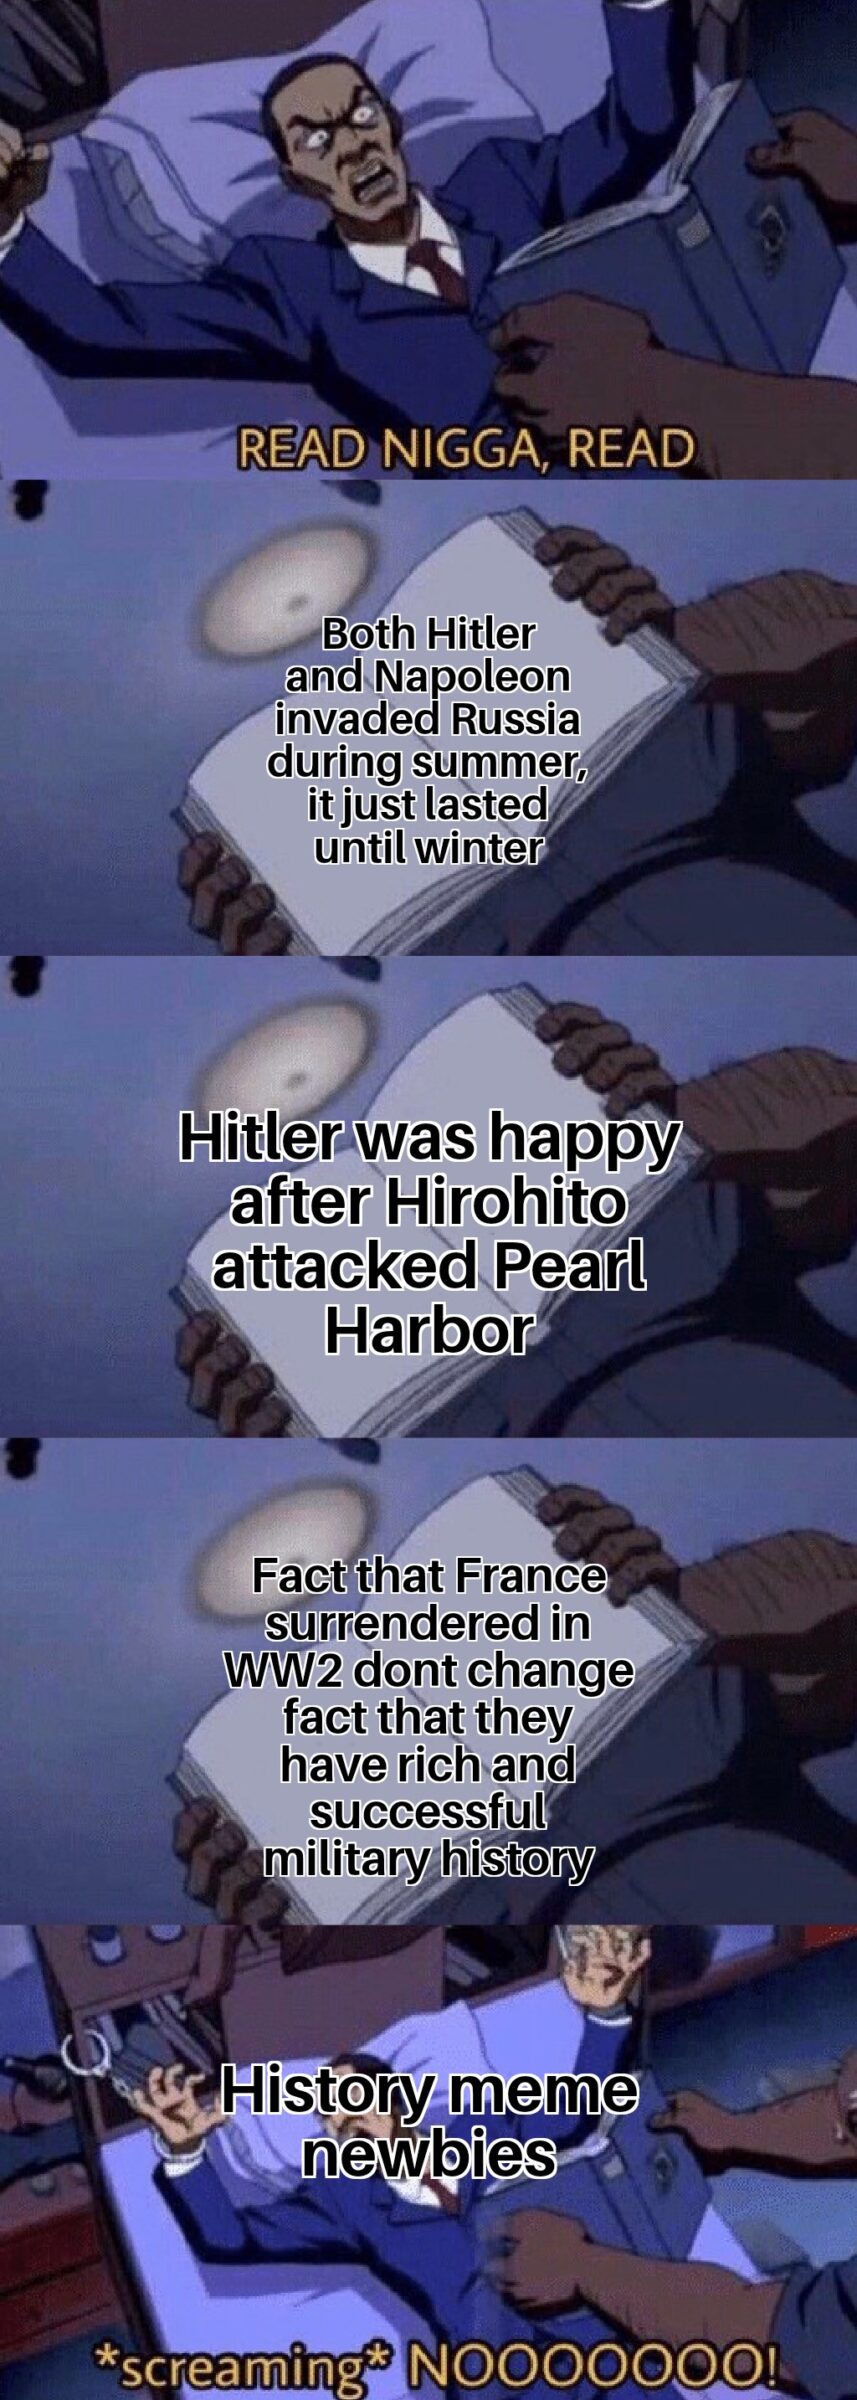 History, Hitler, Russia, Germany, French, Japan History Memes History, Hitler, Russia, Germany, French, Japan text: NIGGA, READ Both Hitler and Napoleon invaded Russia during summer,